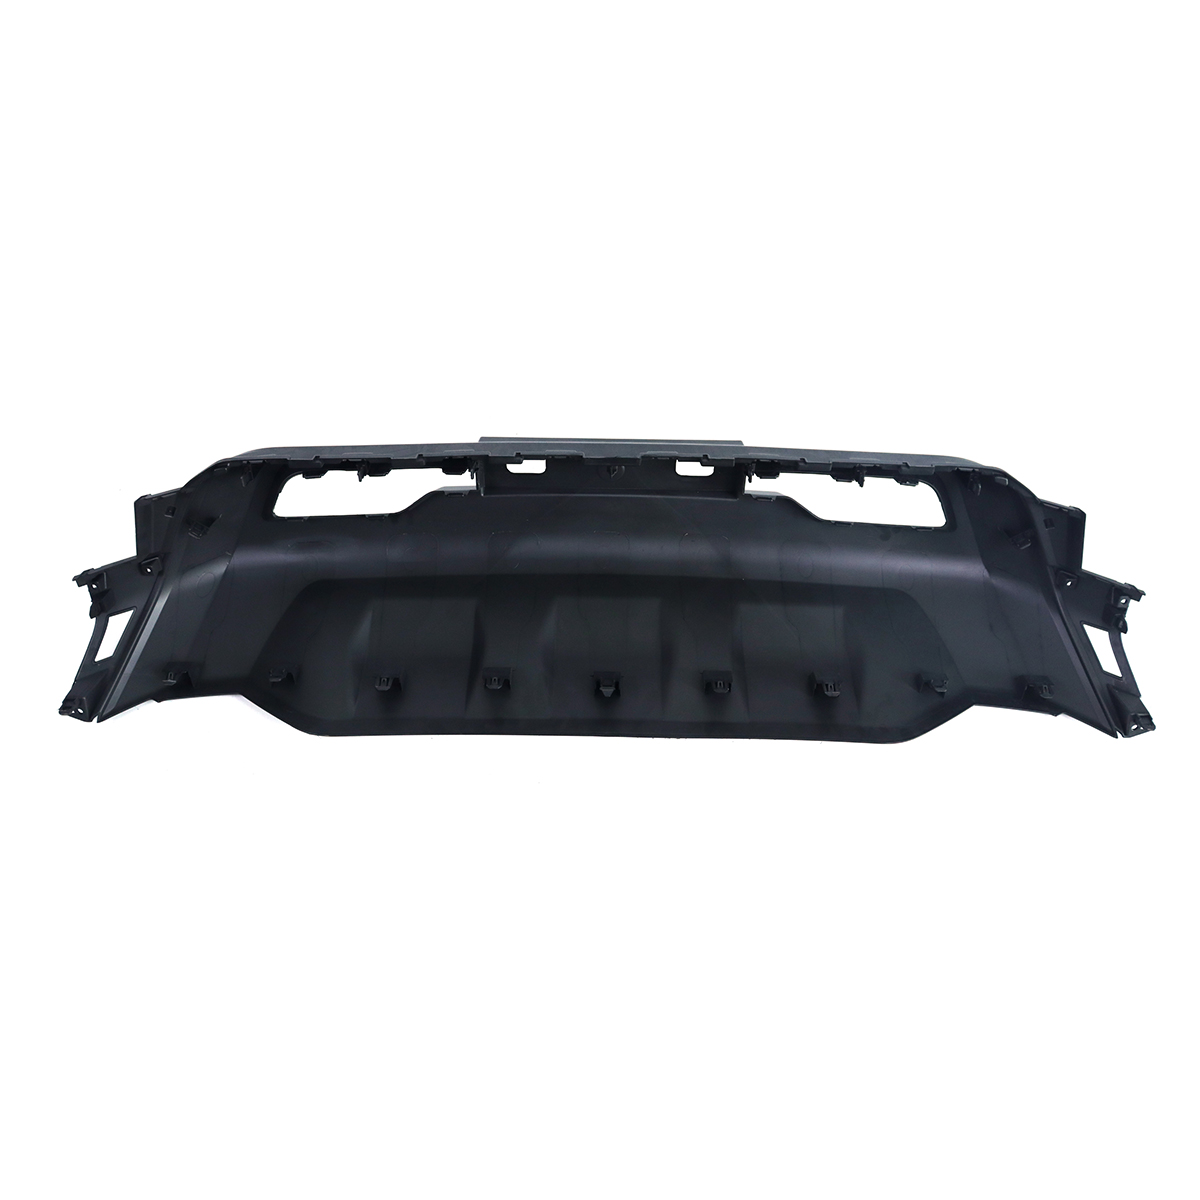 High Performance ABS Material Accessories Fit Black Auto Bumper Guard For Toyota Rocco 2020